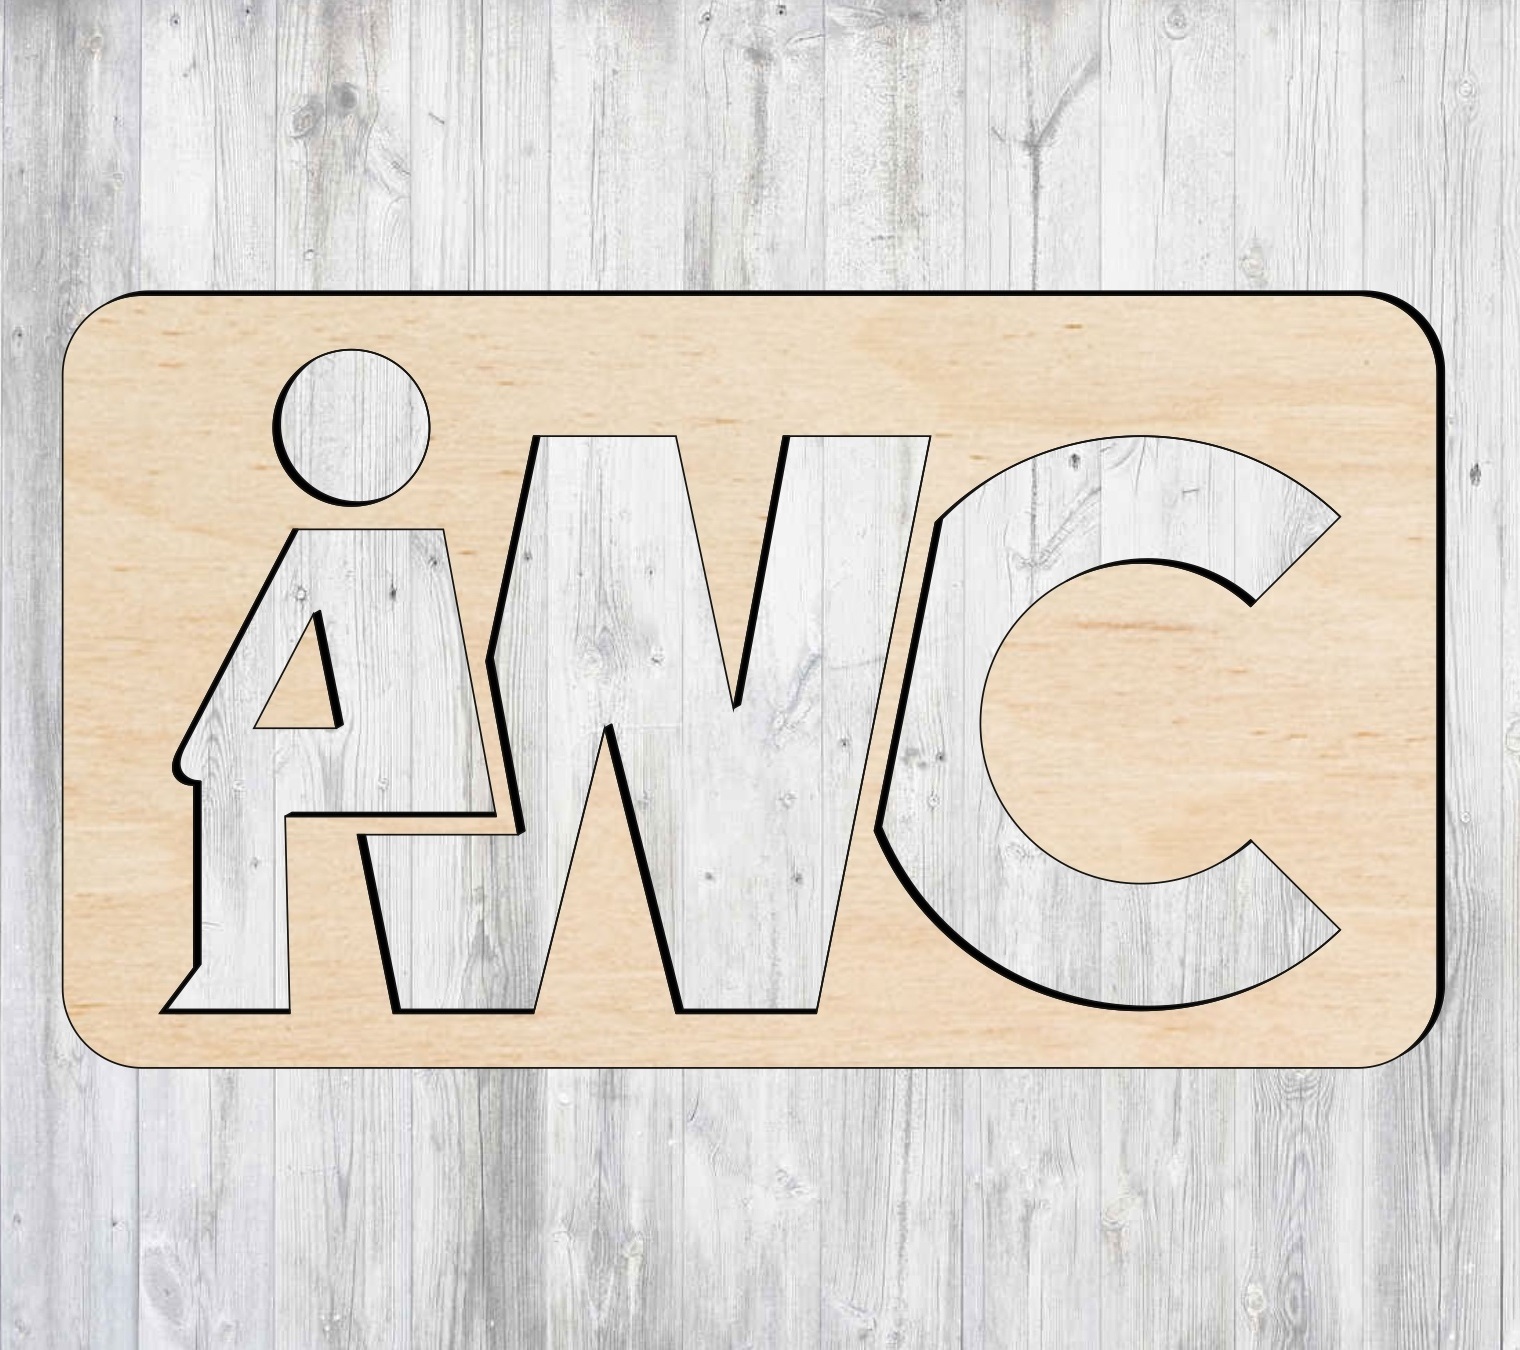 Laser Cut Wooden WC Sign Creative Toilet Sign Free Vector